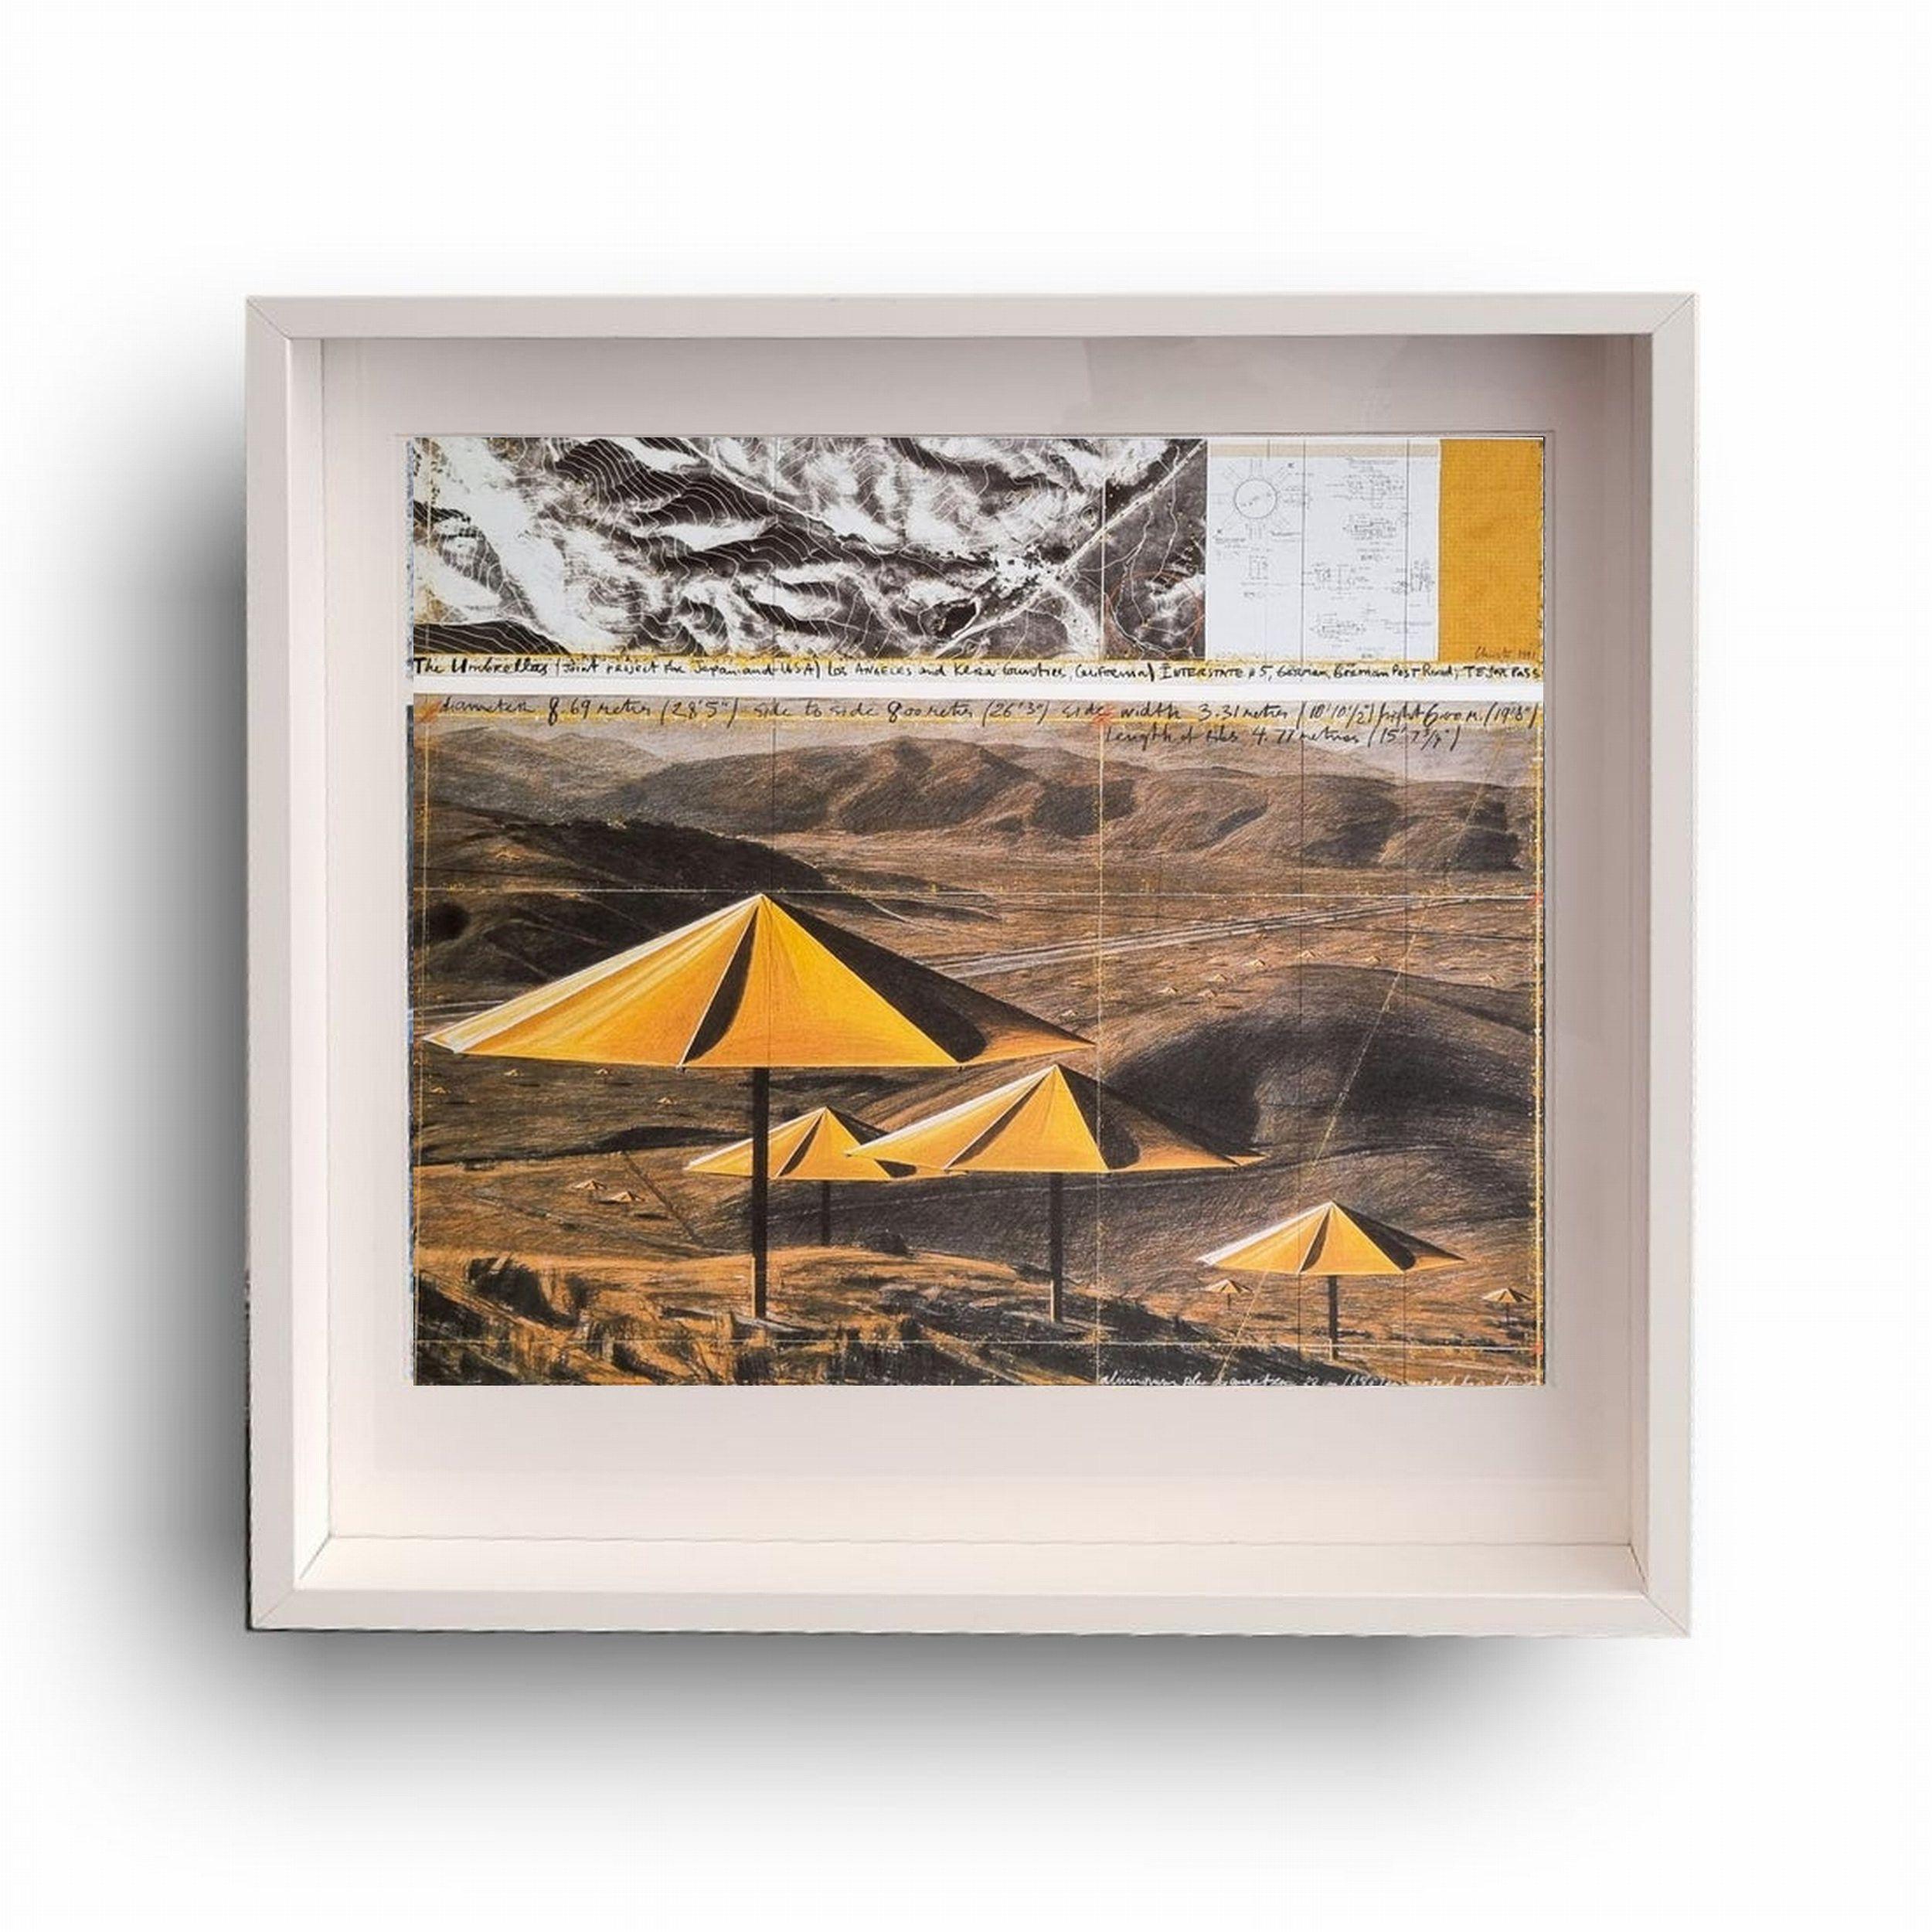 The Umbrellas (Yellow) (Jeanne Claude, Installation, Iconic) - Print by Christo and Jeanne-Claude